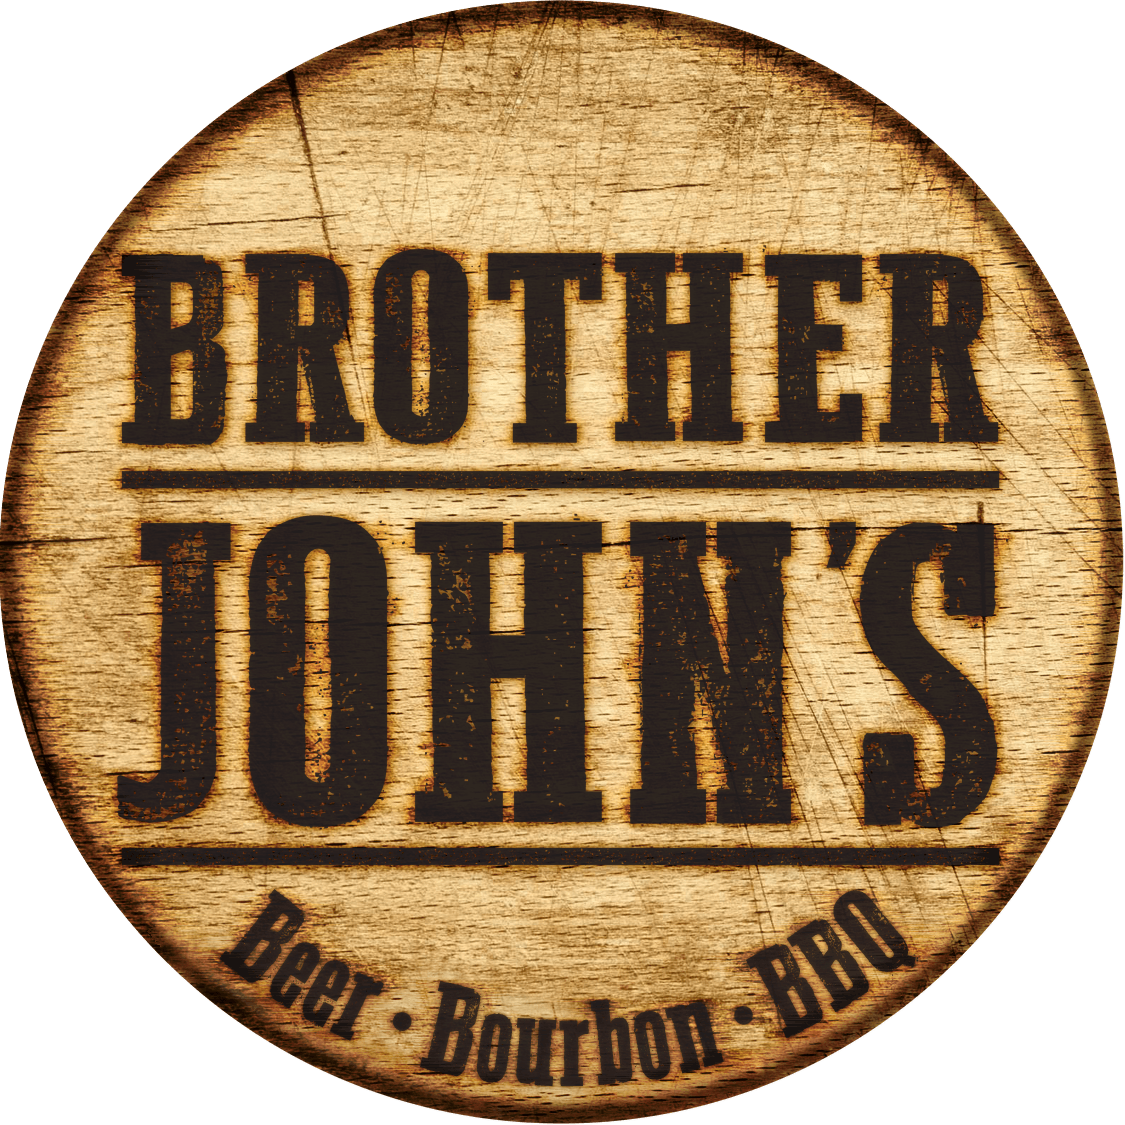 Brother John's Beer, Bourbon & BBQ Home